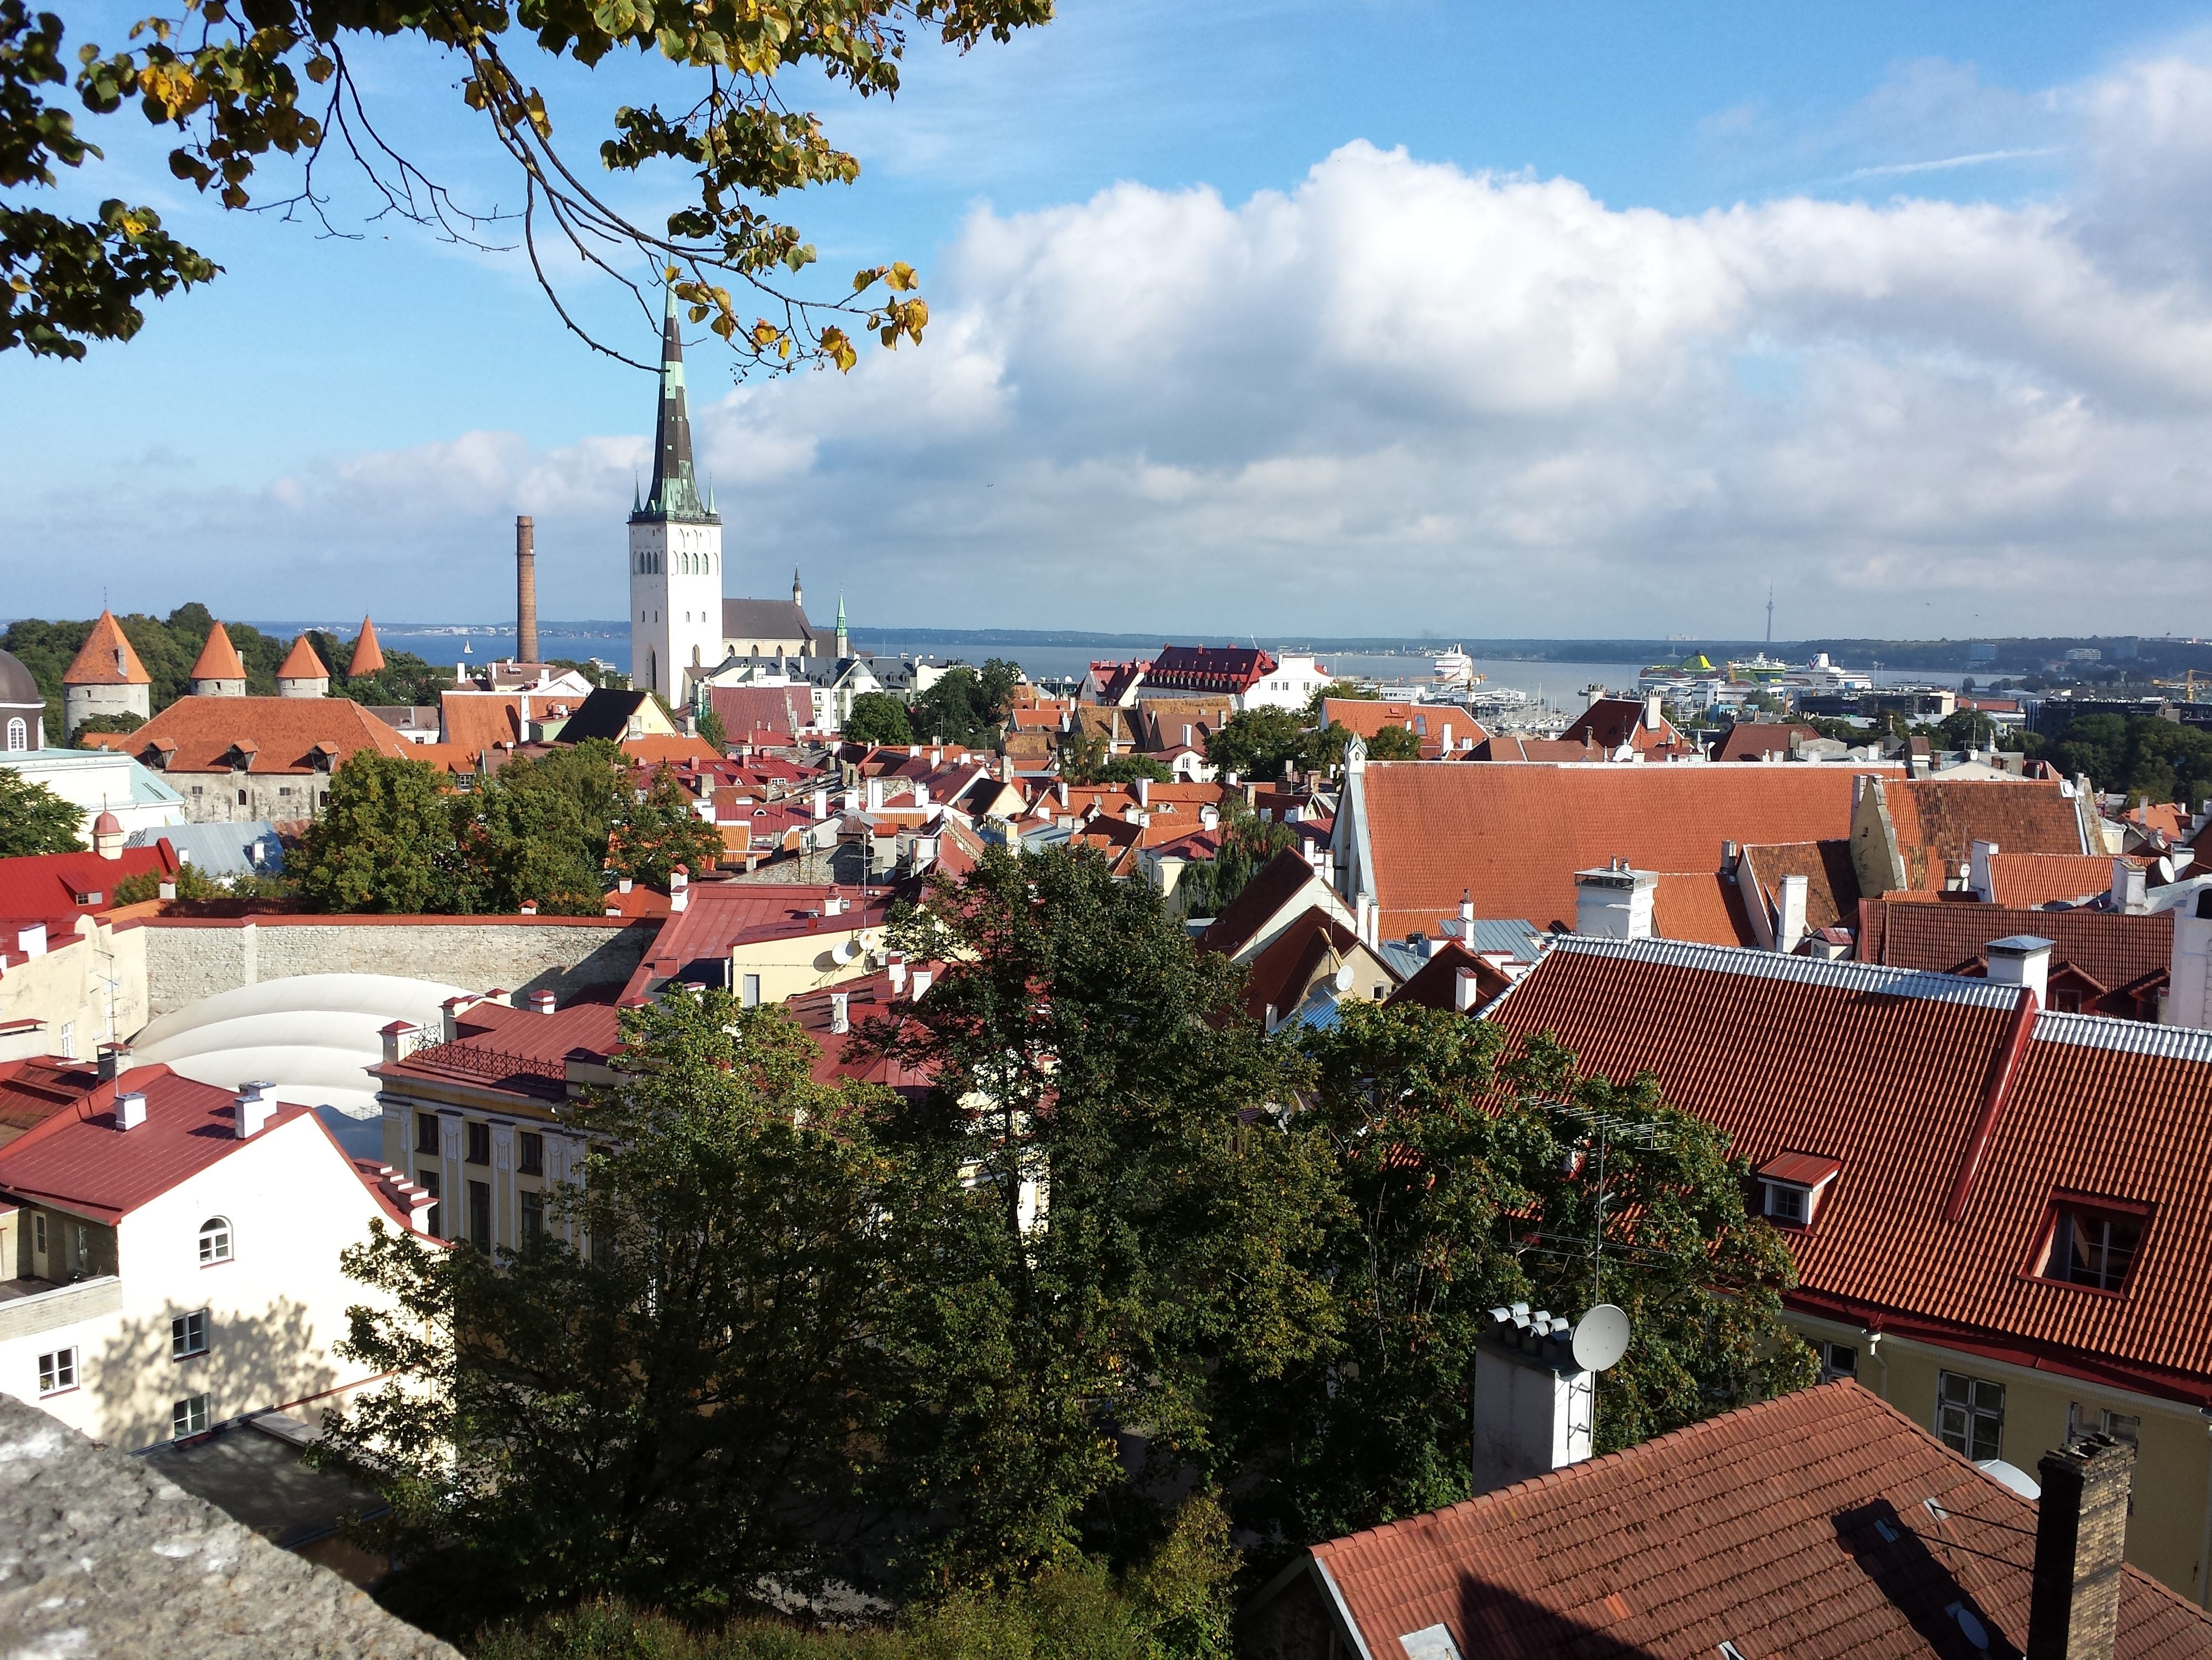 epa05023342 A general view of the Estonian capital Tallinn, as seen from the Toompea old town of Tallinn, Estonia, 25 September 2015. Eurozone economic growth slowed in the third quarter of 2015, coming in at a less-than-expected 0.3 per cent compared with the previous three months, according to data released 13 November 2015. The 19-member currency bloc has struggled to rev up its economic engine after emerging from recession in 2013. Inflation is hovering around zero and unemployment is only gradually falling. Growth in the eurozone's gross domestic product (GDP) continued to slip after dropping from 0.5 per cent in the first quarter and 0.4 per cent in the second, according to an estimate by the European Union's statistics office, Eurostat. Estonia is part of Eurozone. EPA/MAURITZ ANTIN